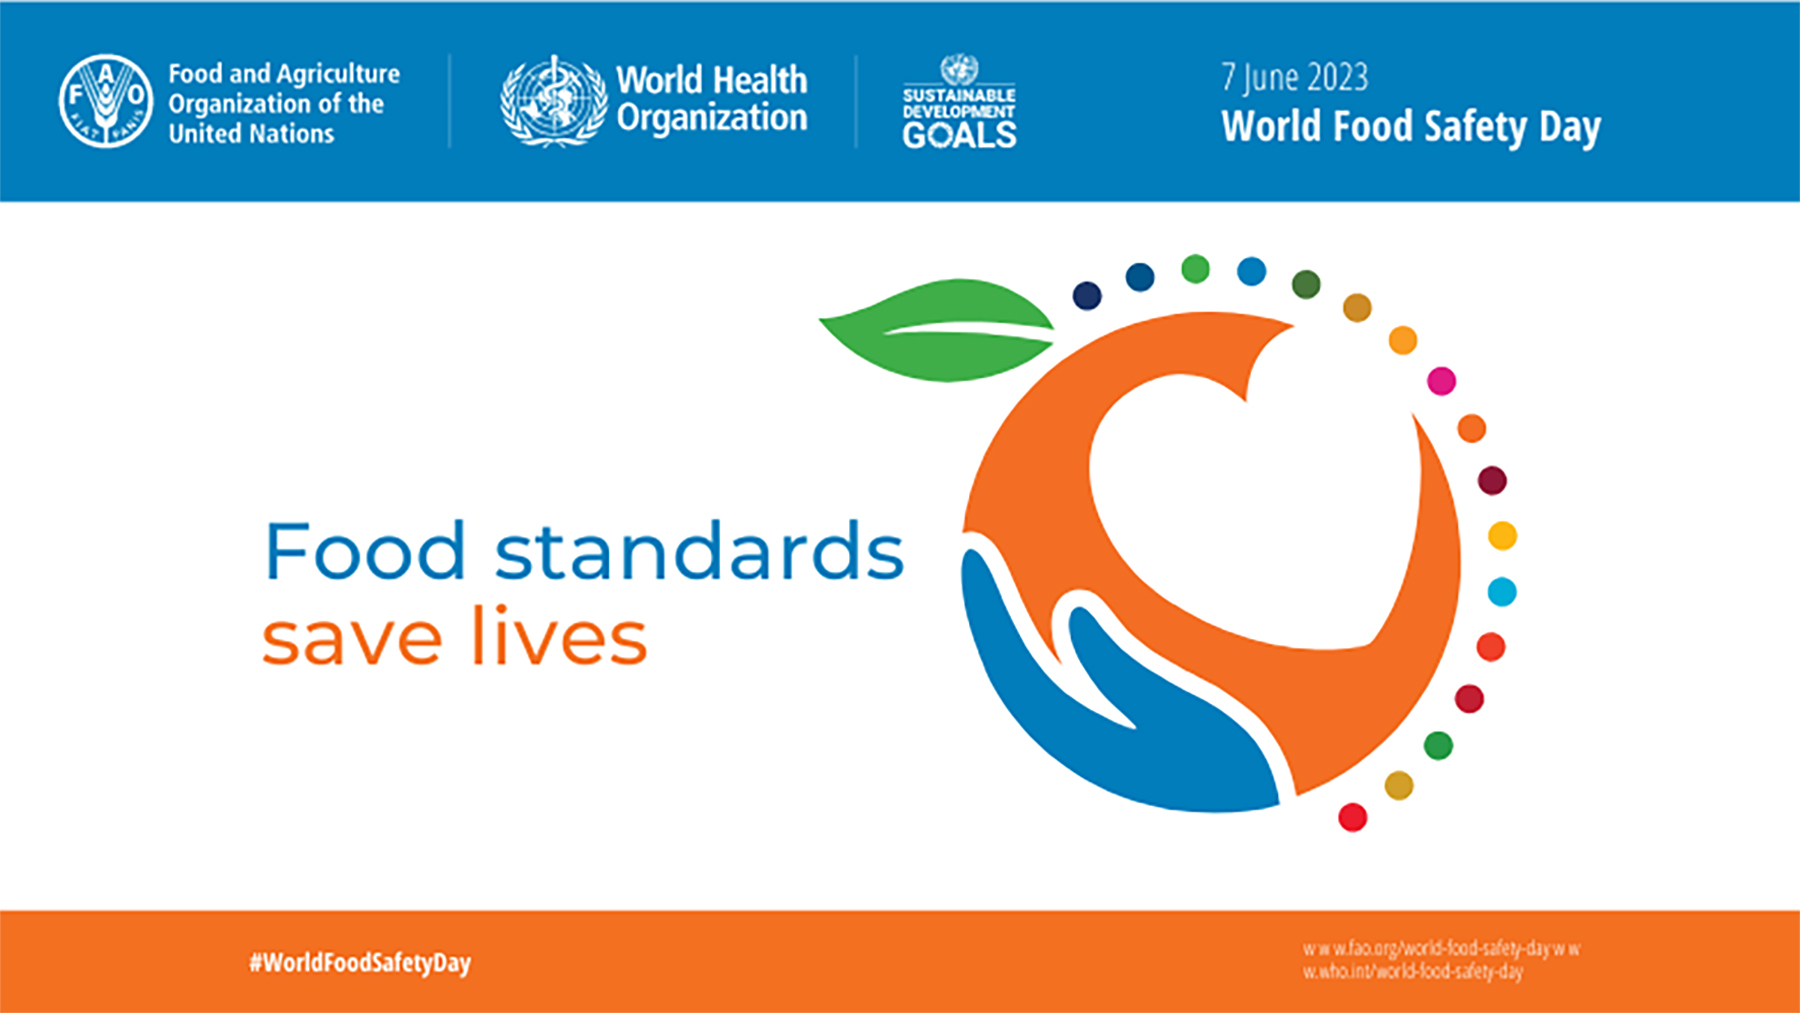 The fifth World Food Safety Day (WFSD) will be celebrated on 7th June 2023 to draw attention and inspire action to help prevent, detect and manage foodborne risks, contributing to food security, human health, economic prosperity, agricultural production, market access, tourism and sustainable development.